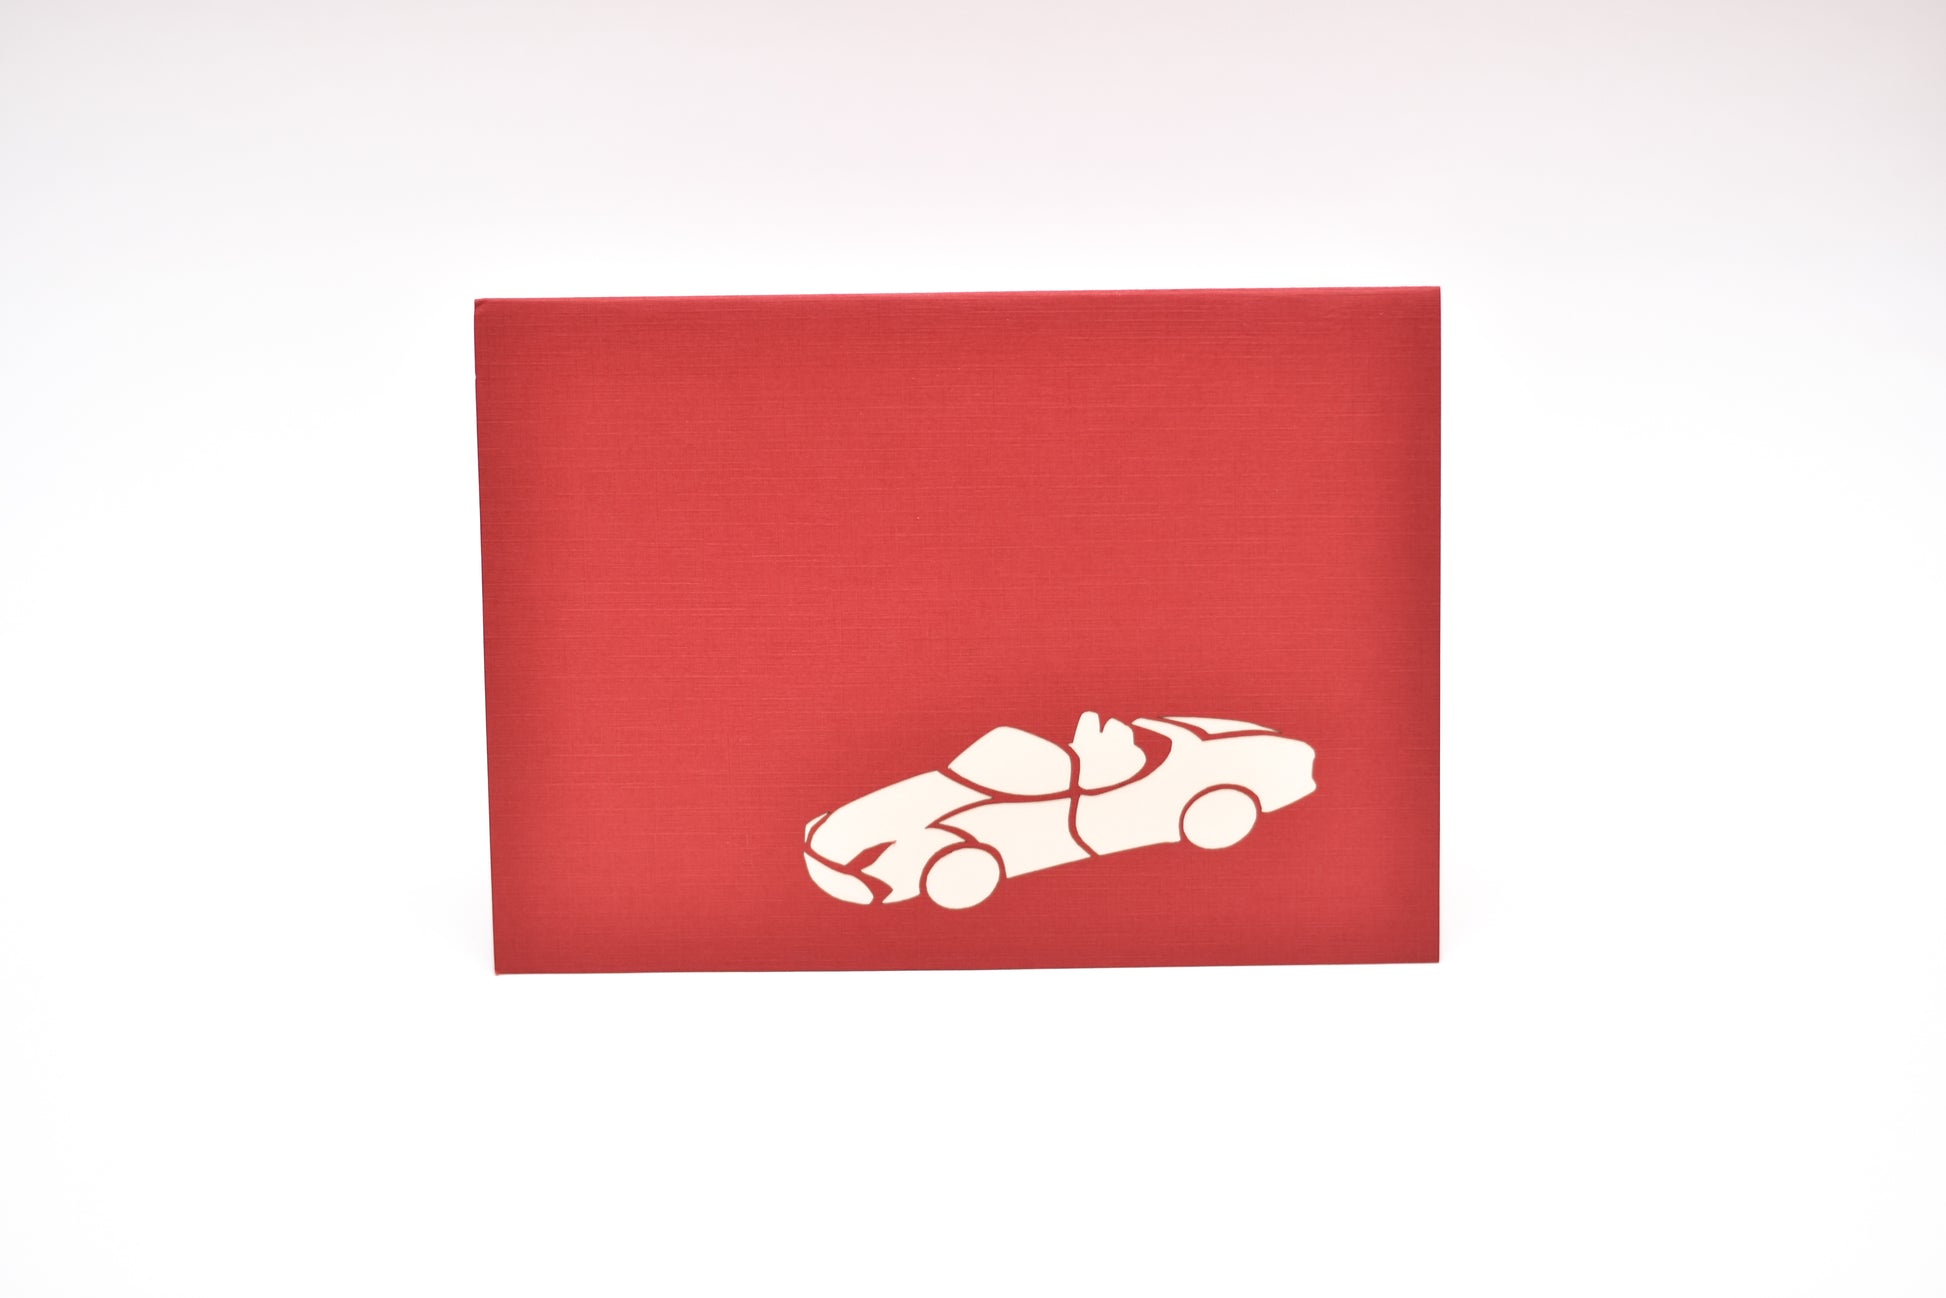 Red card showing silhouette of convertible sports car in white on front cover 